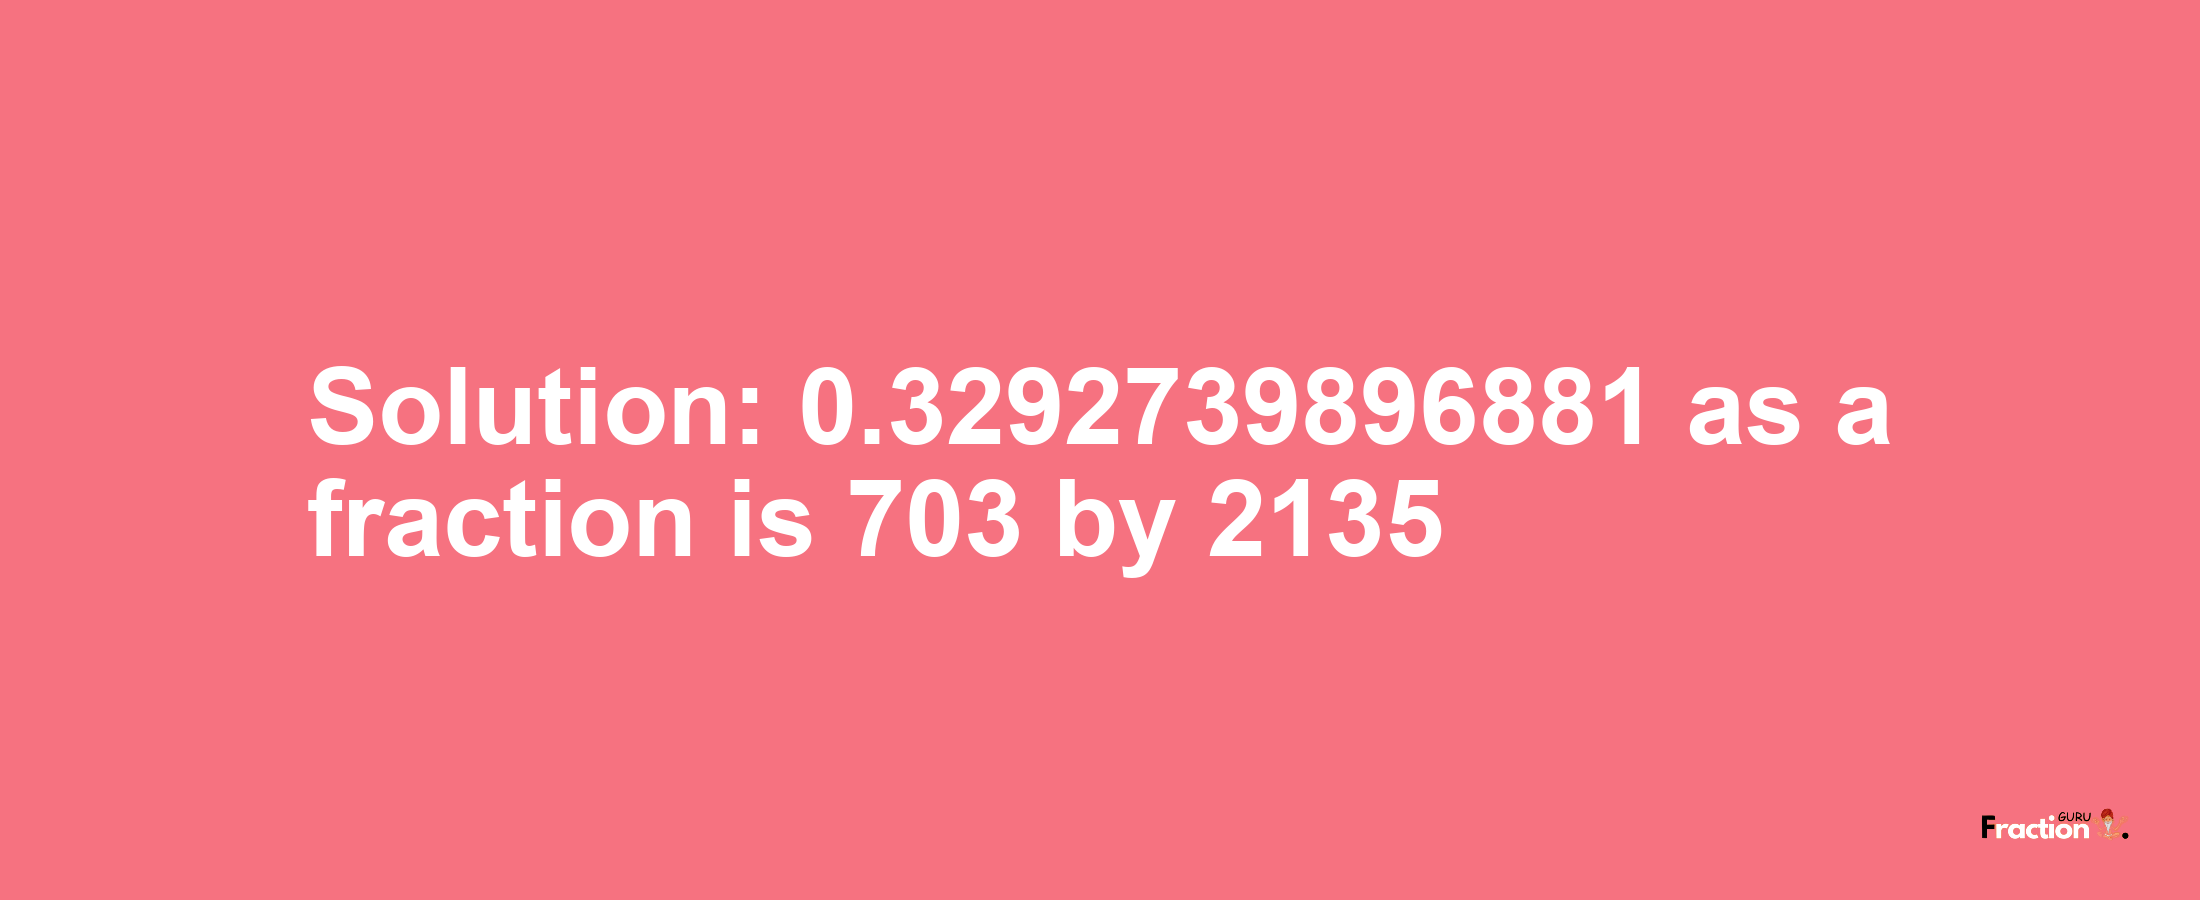 Solution:0.3292739896881 as a fraction is 703/2135